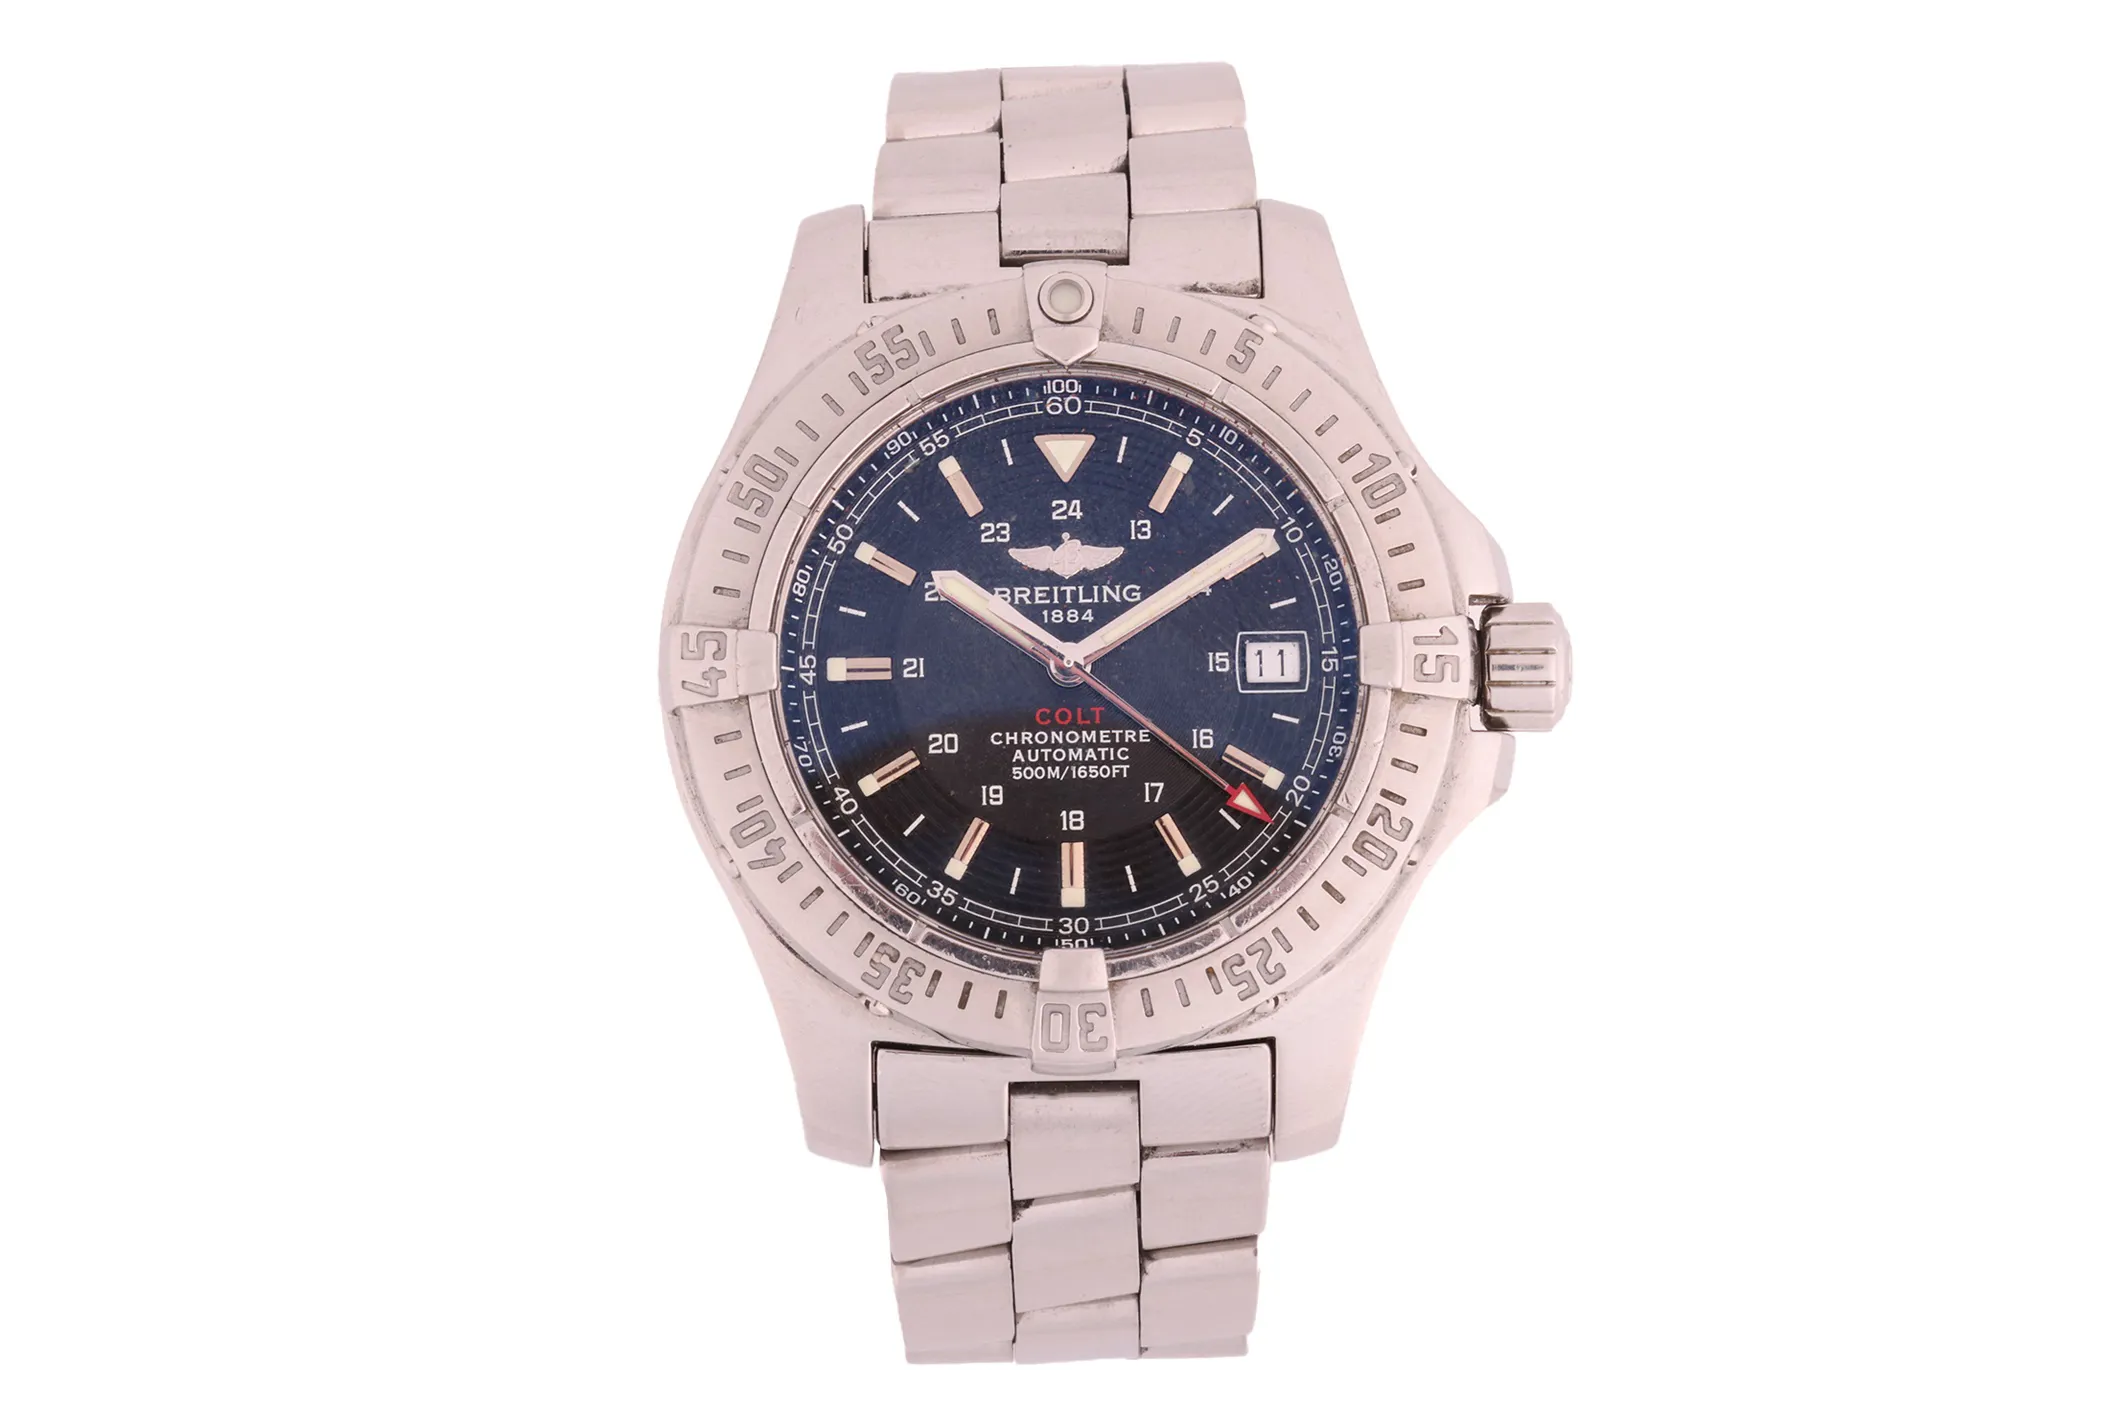 Breitling Colt A17380 41mm Stainless steel Black